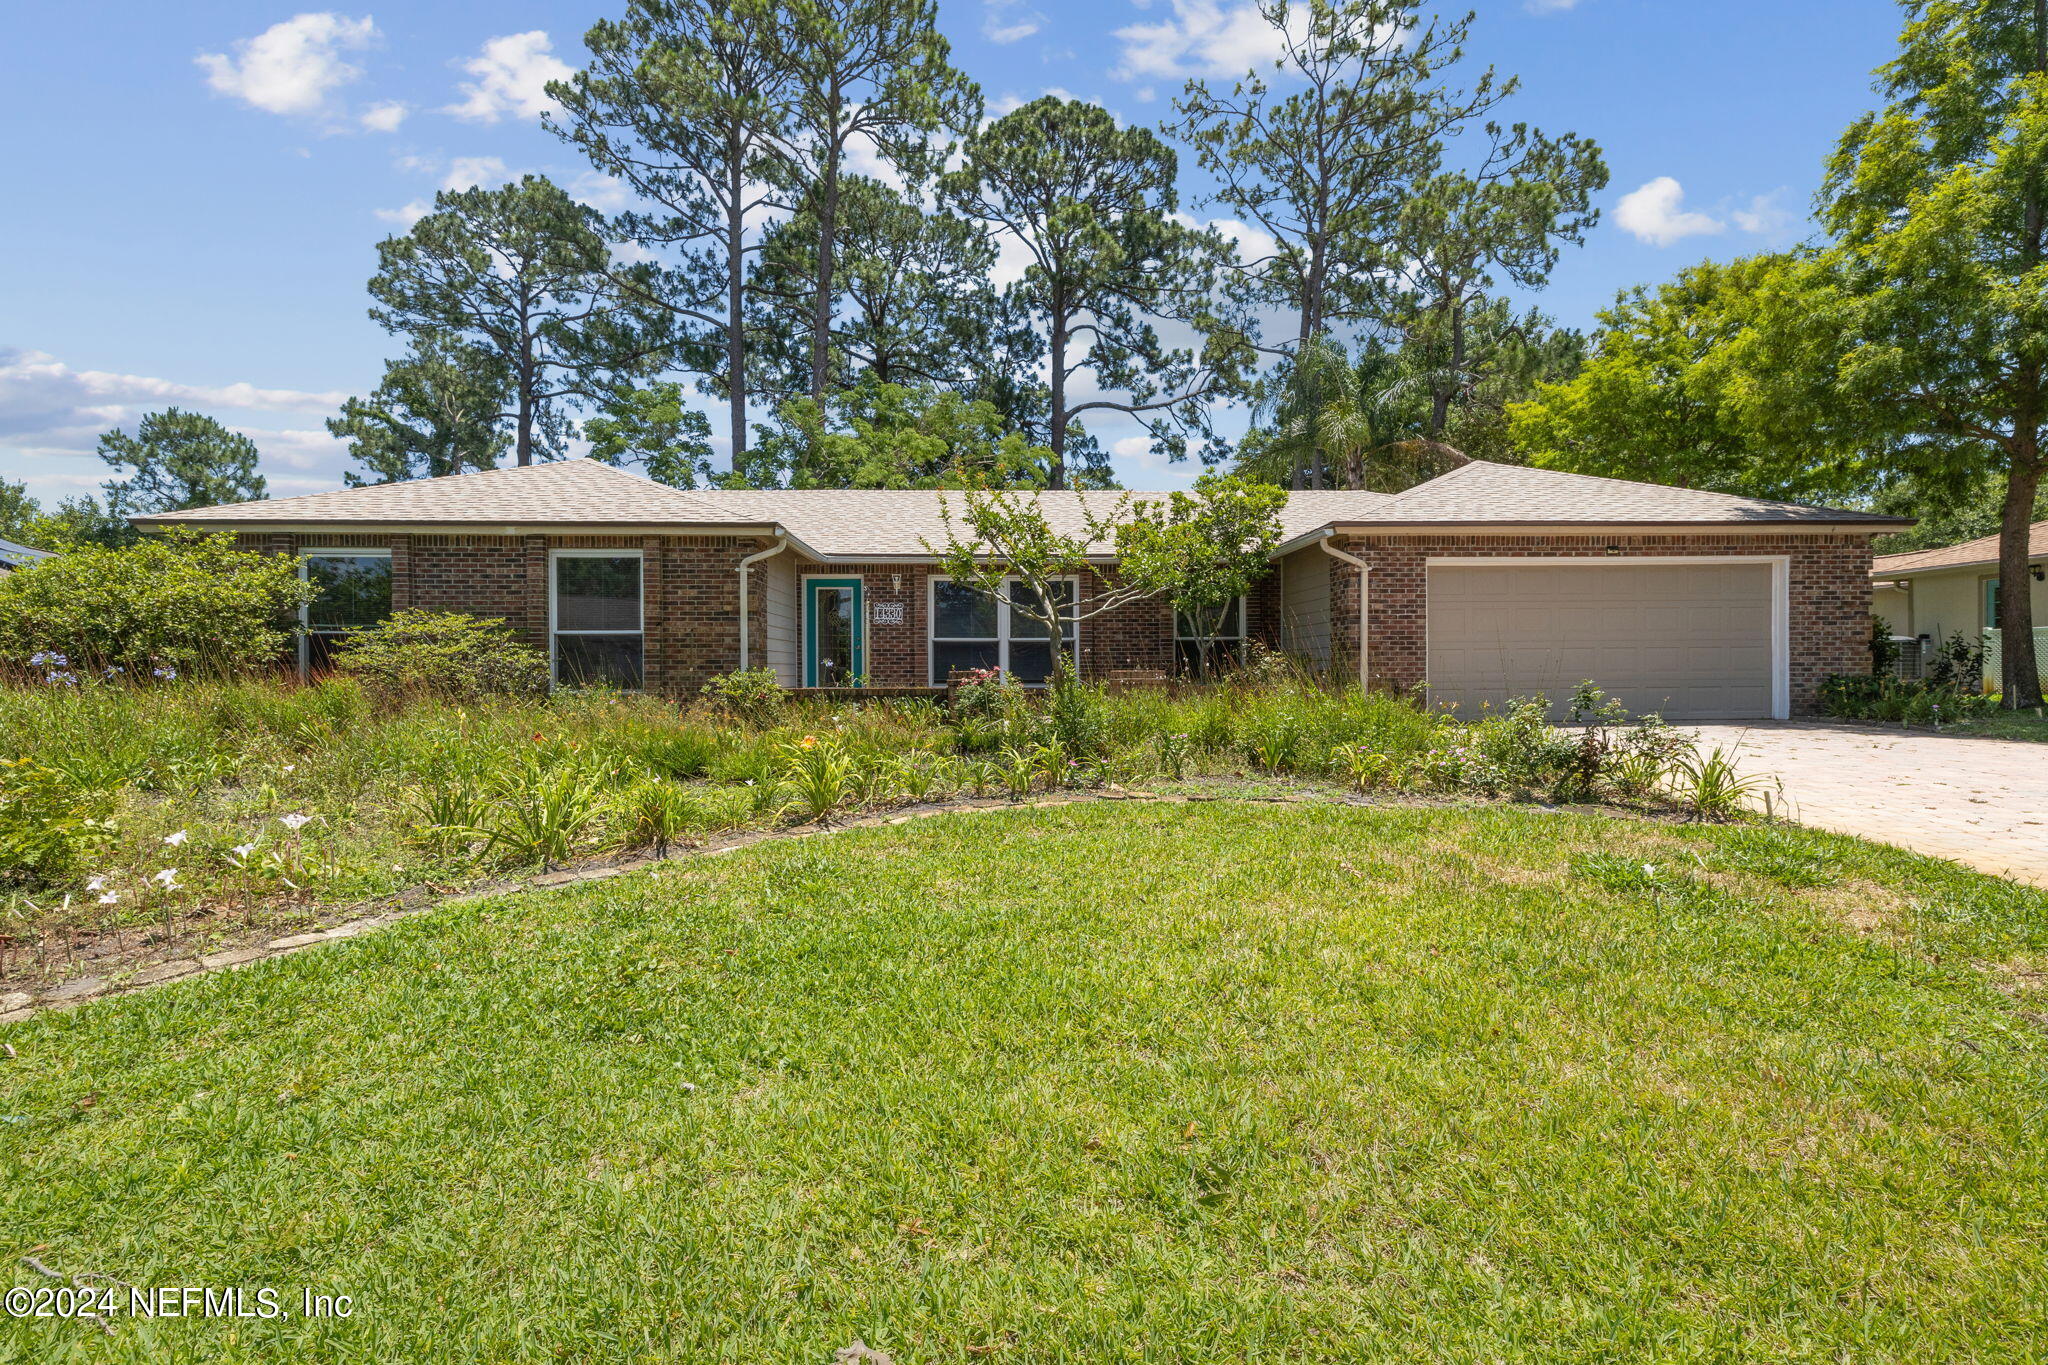 Jacksonville, FL home for sale located at 14330 Falconhead Drive, Jacksonville, FL 32224